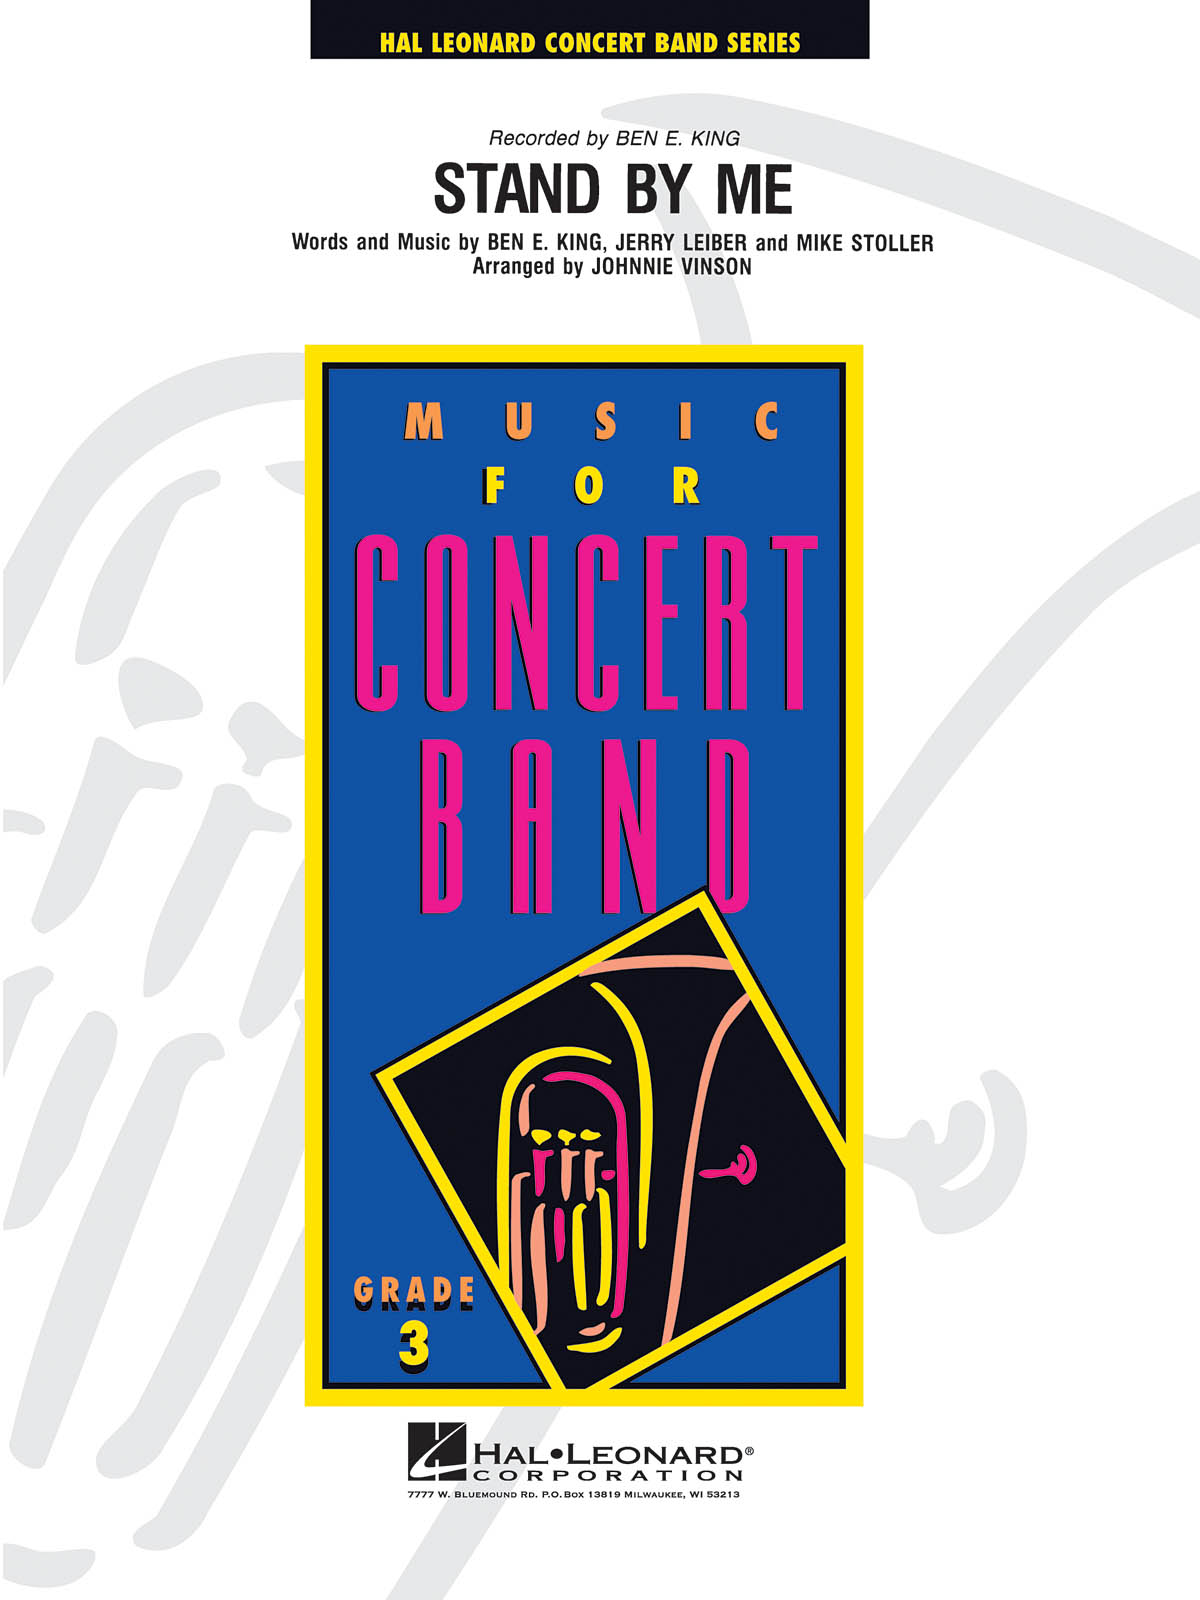 Ben E. King: Stand By Me: Concert Band: Score and Parts